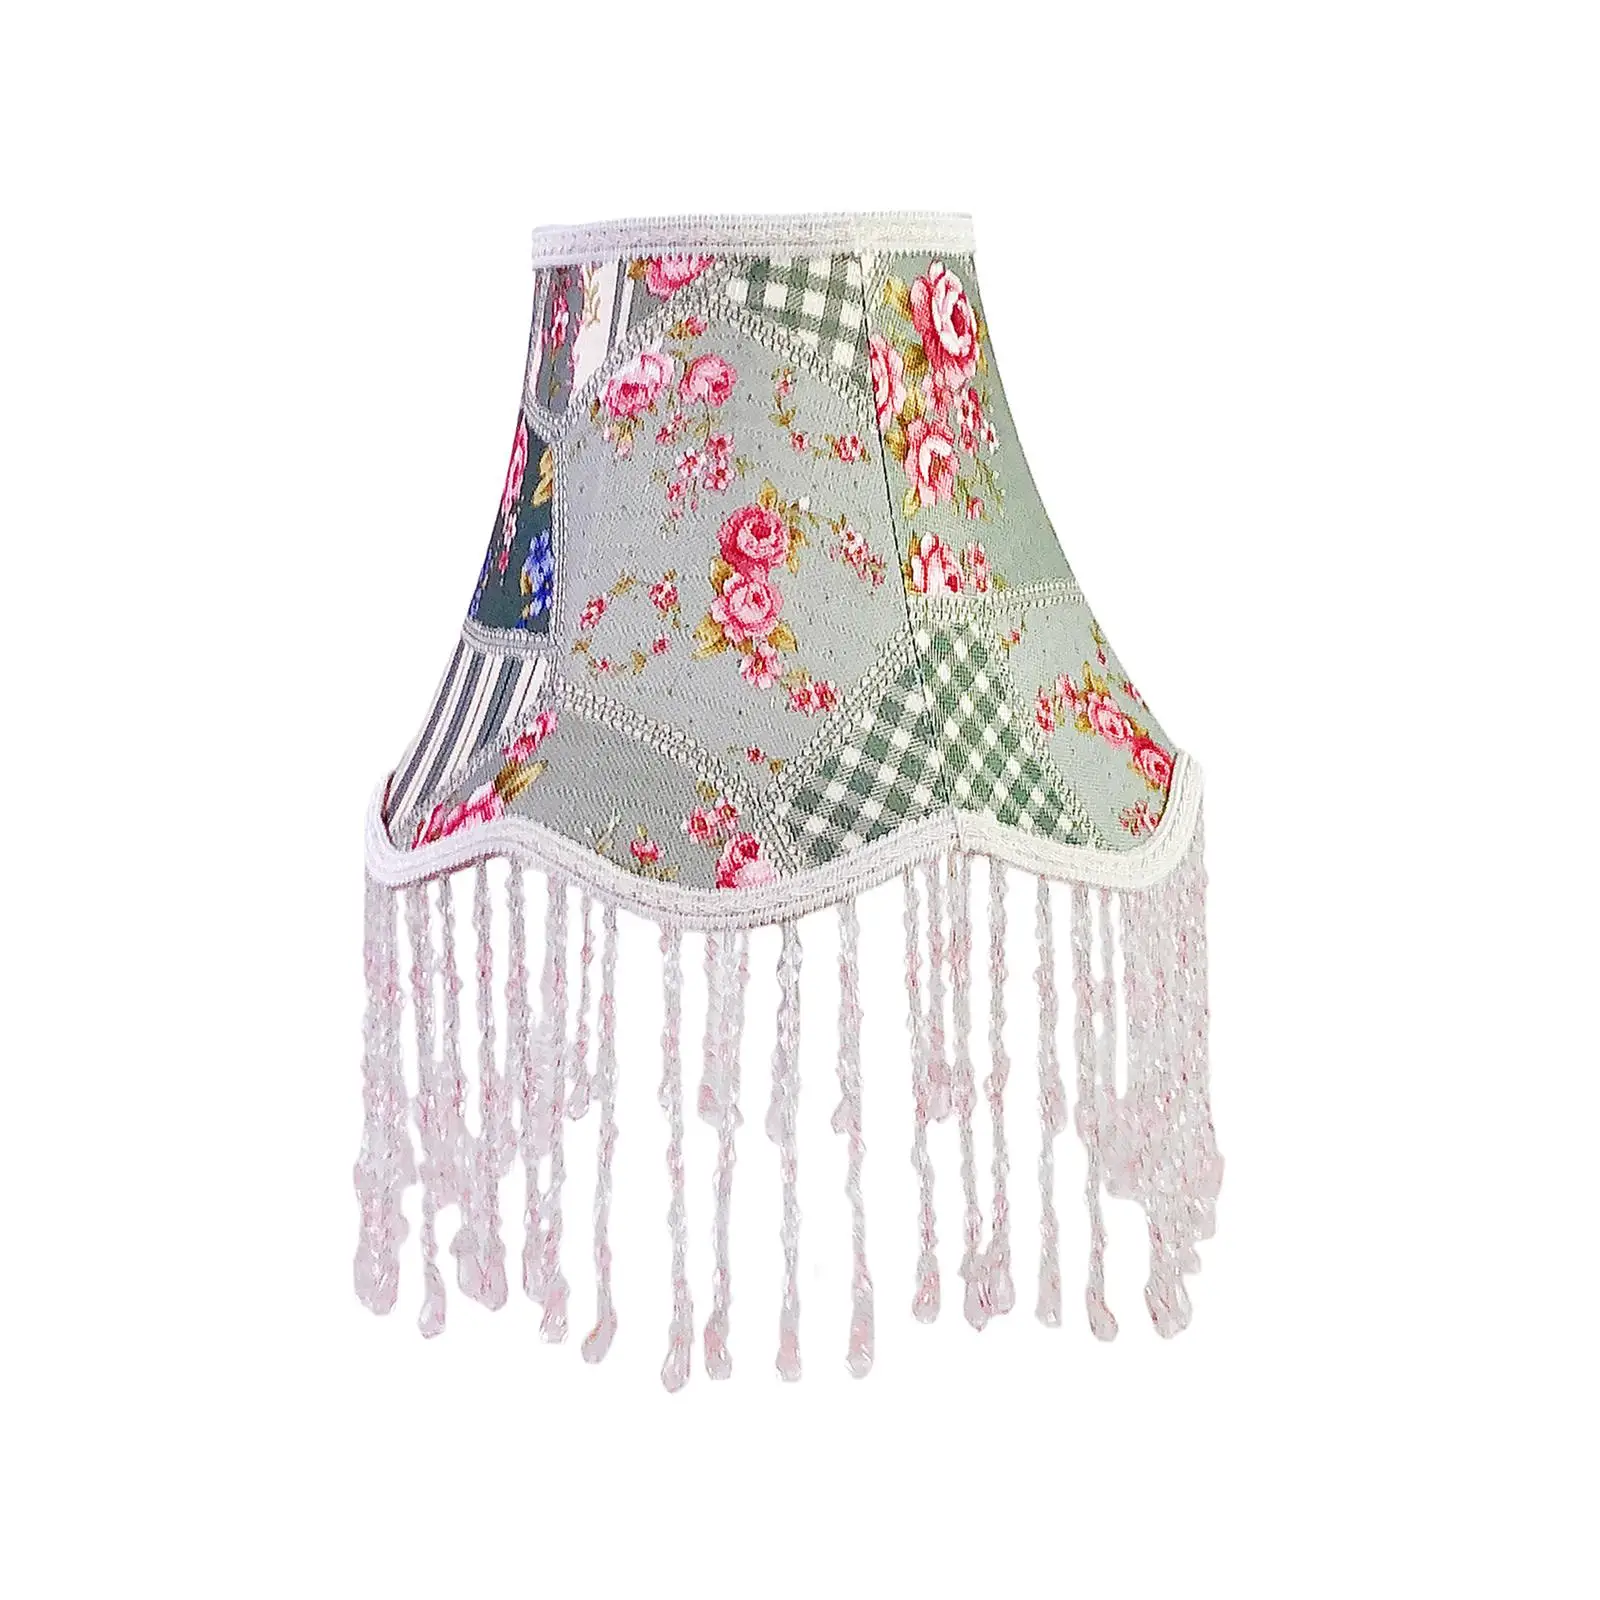 Lamp Shade with Fringe Beads Vintage for Pendant Light Shade European Lampshade for Home Dining Room Living Room Hotel Decor